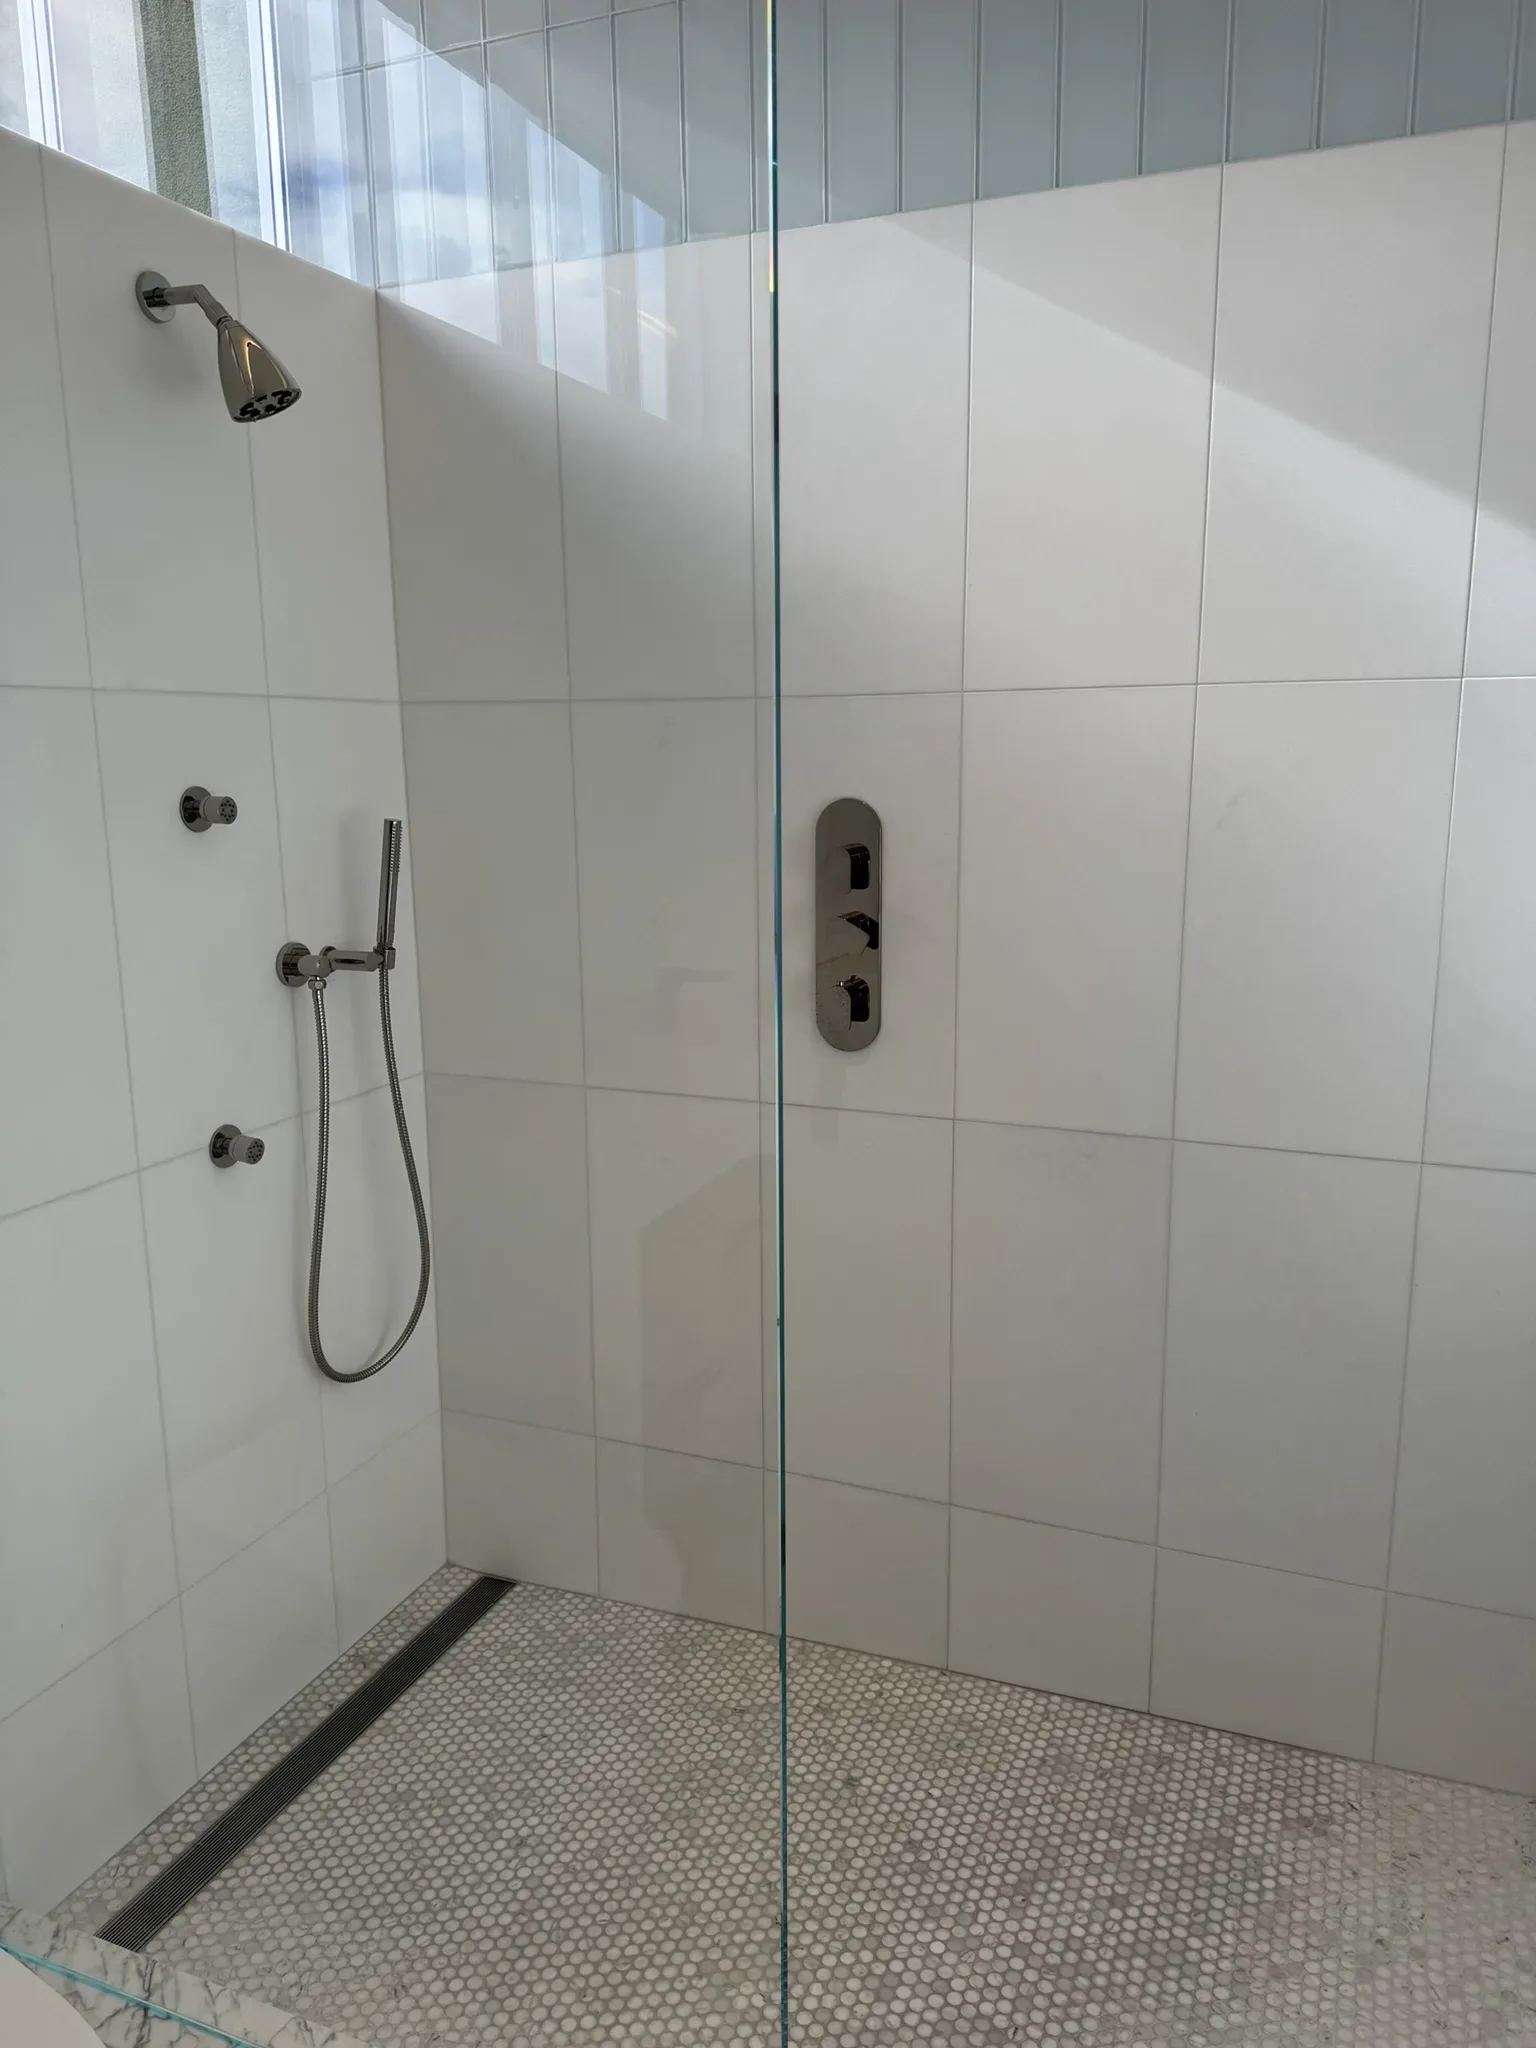 A shower with a glass door and a shower head.